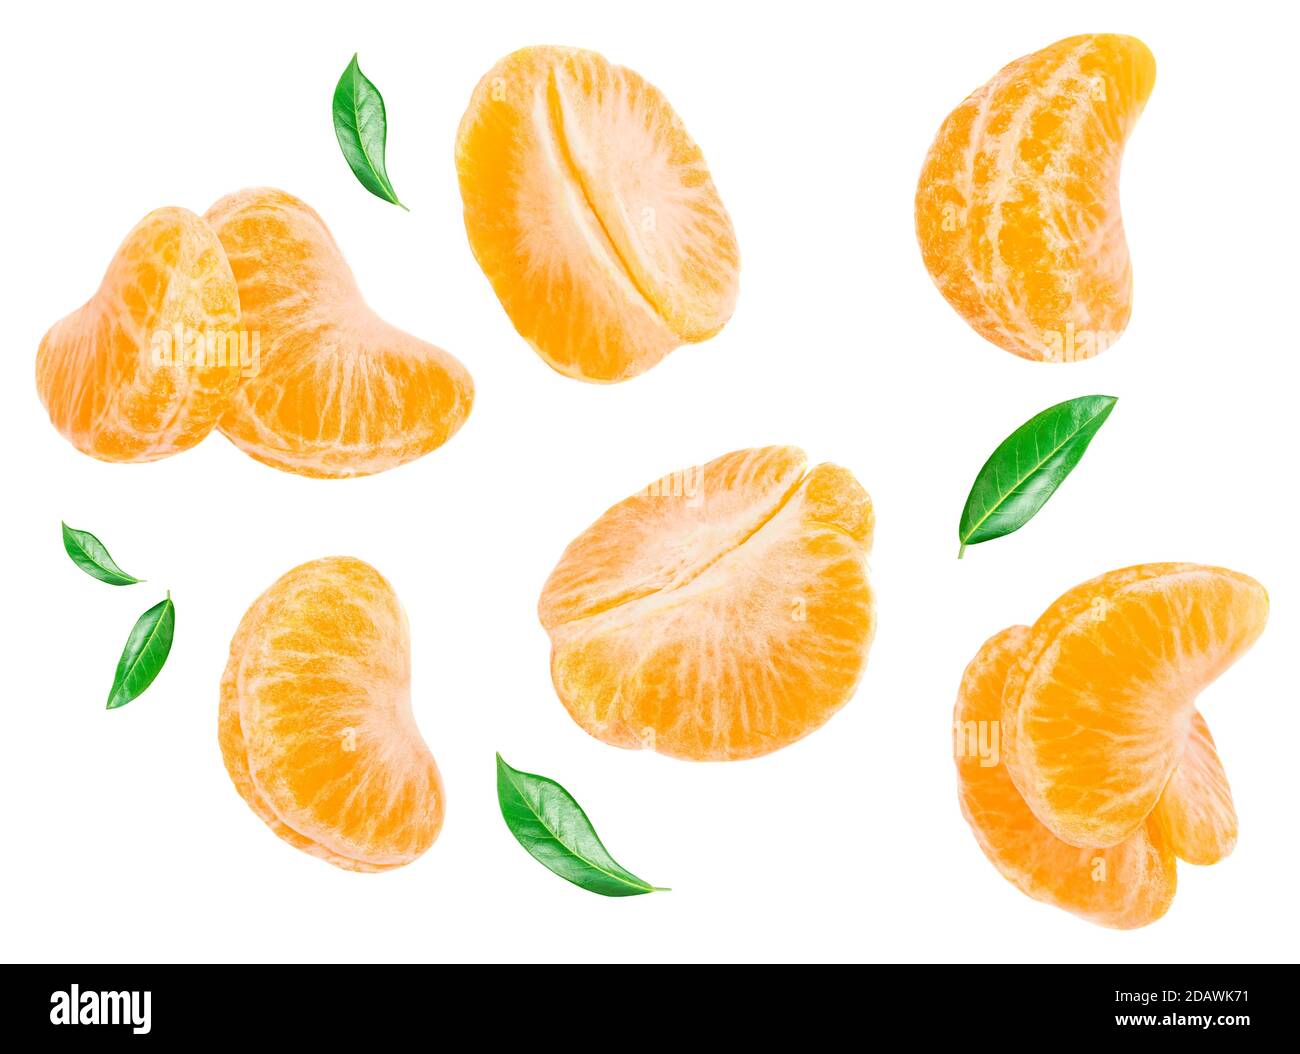 Fresh Mandarines, tangerine, clementine slices  with green citrus leaves isolated on white background. Pattern. Top view. Flat lay Stock Photo